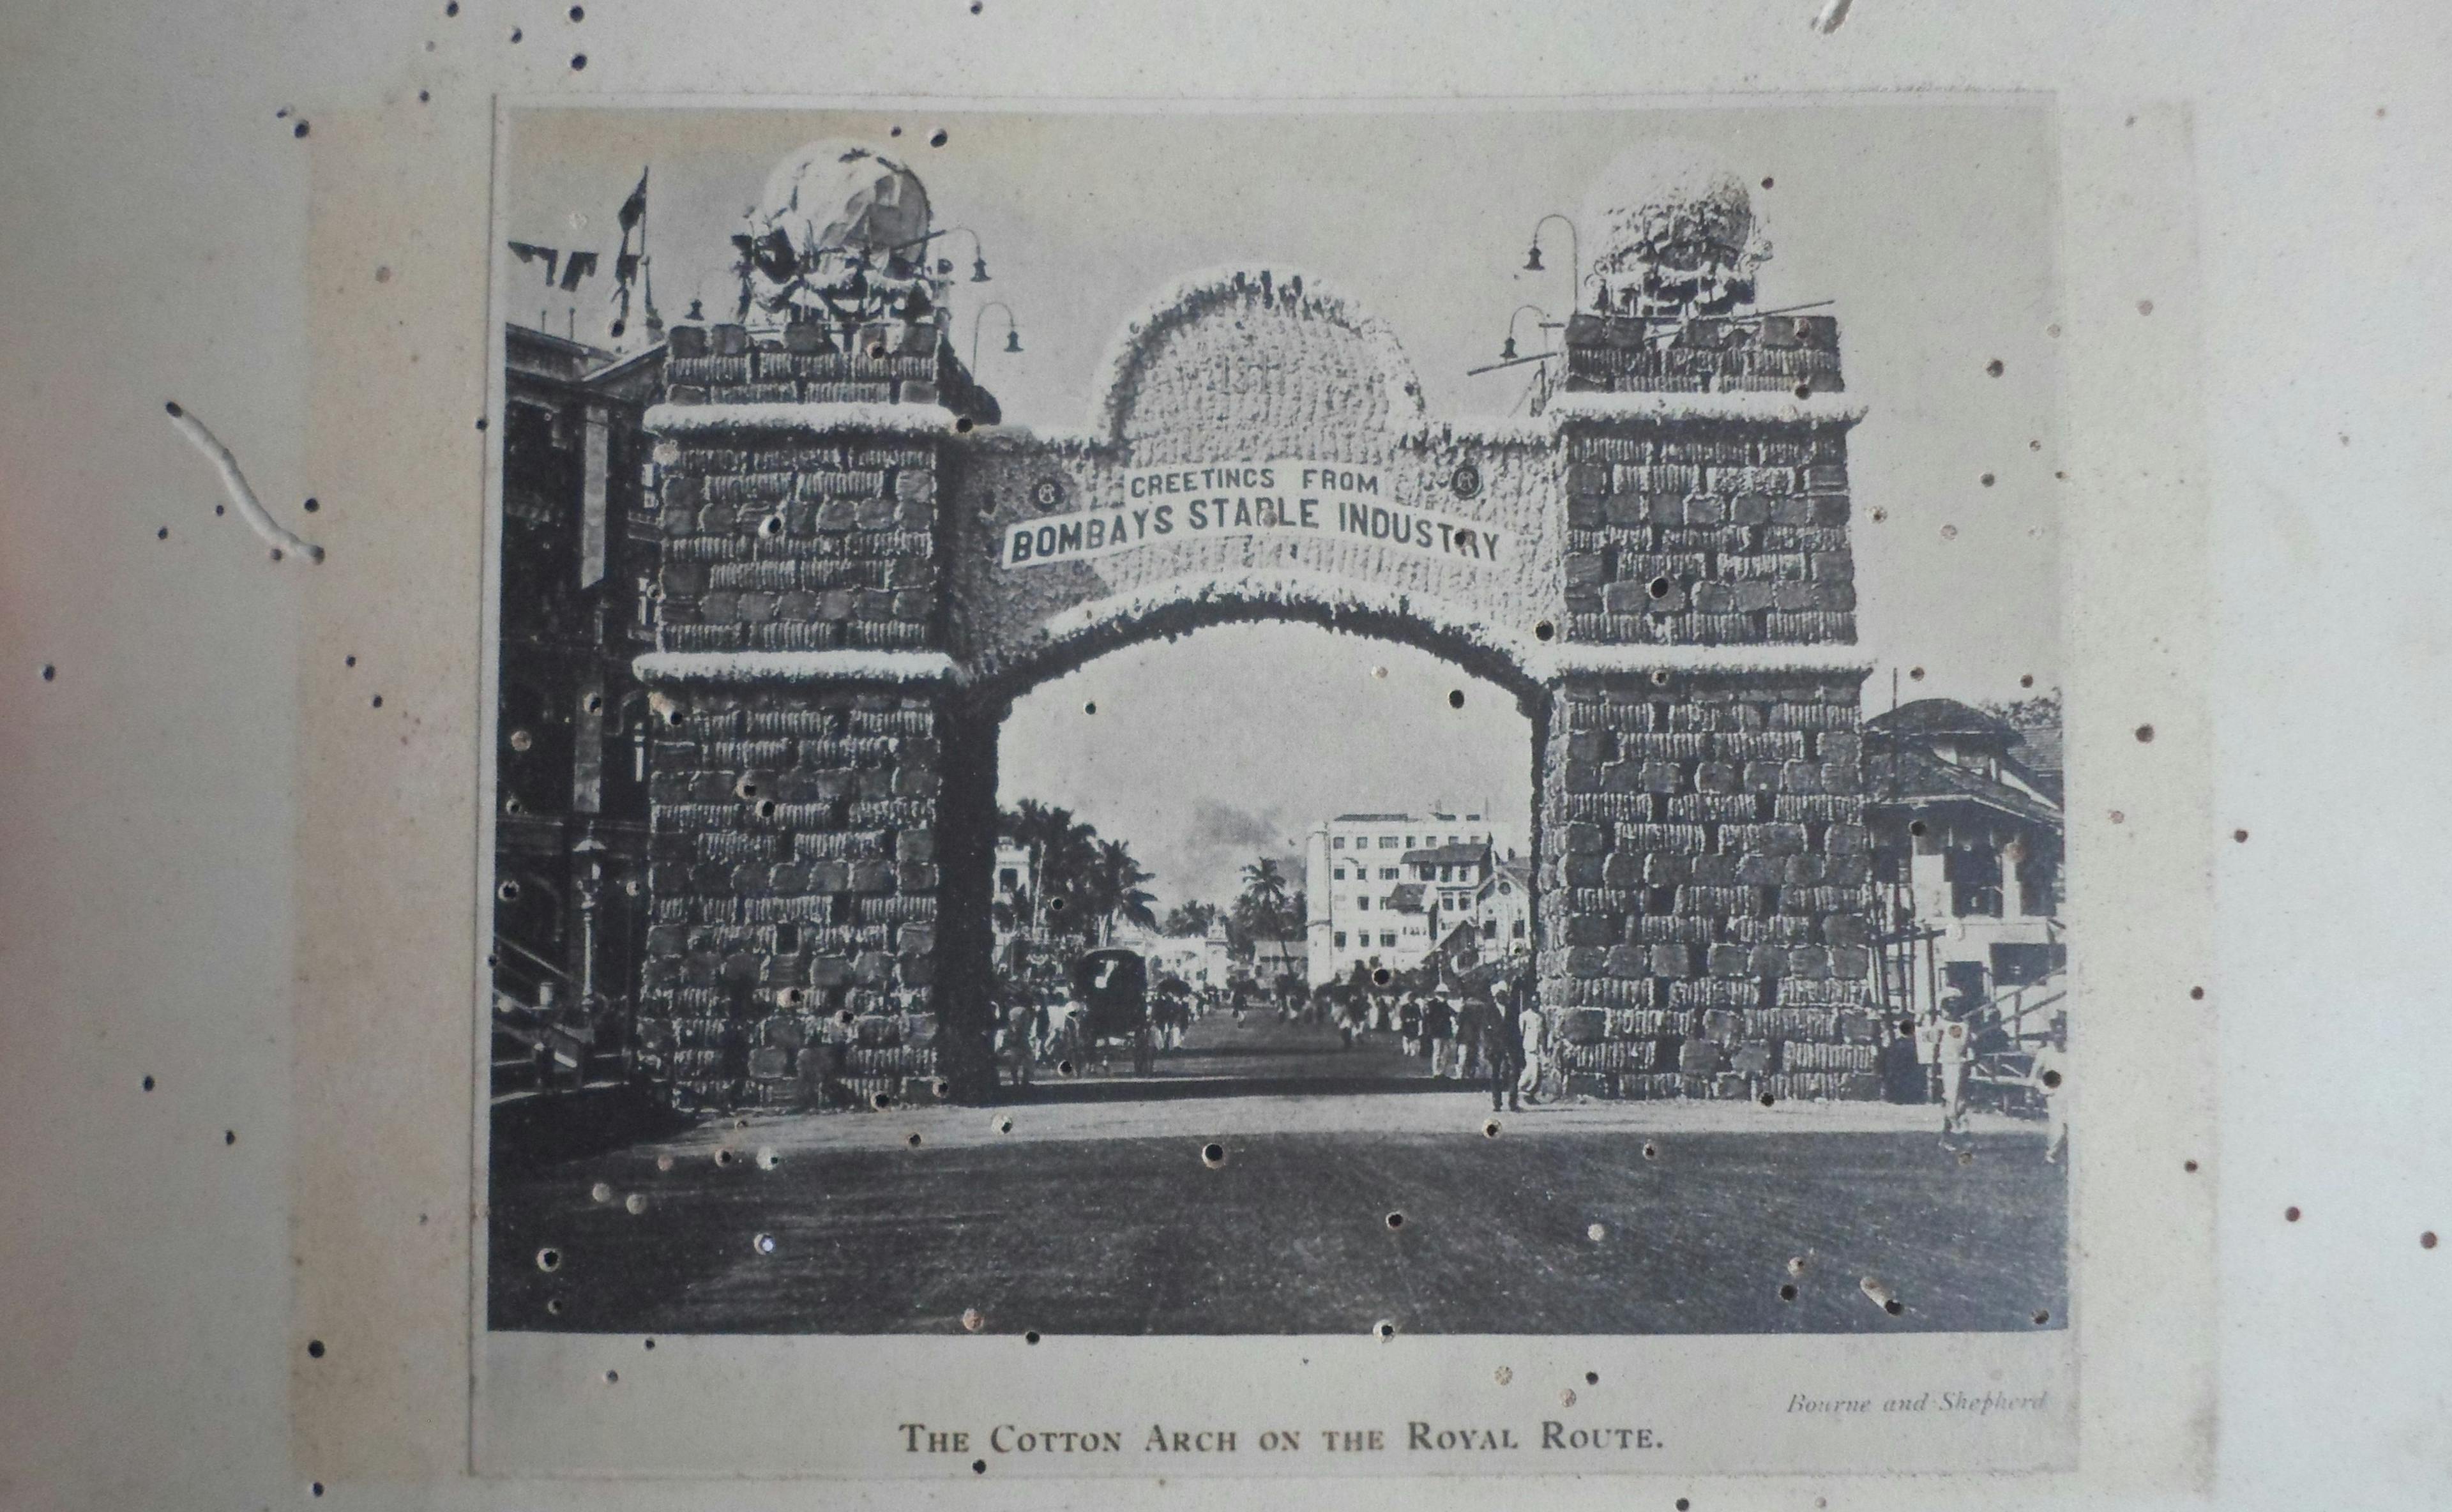 A damaged historic image of the Cotton Arch